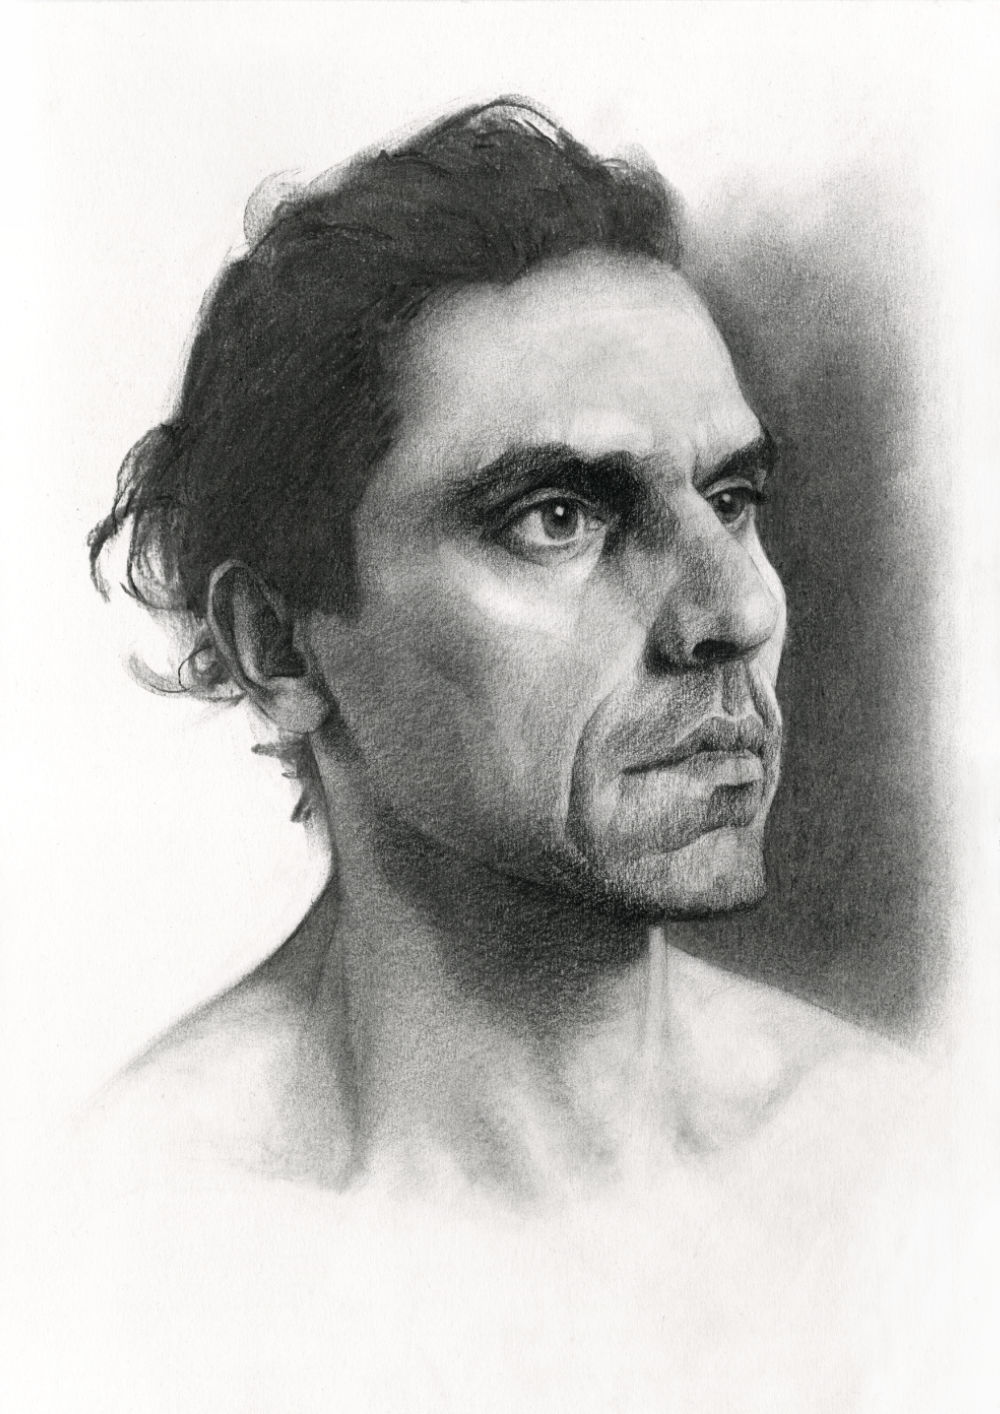 Portrait Drawing in Charcoal on Paper, by Artist & Illustrator James Martin